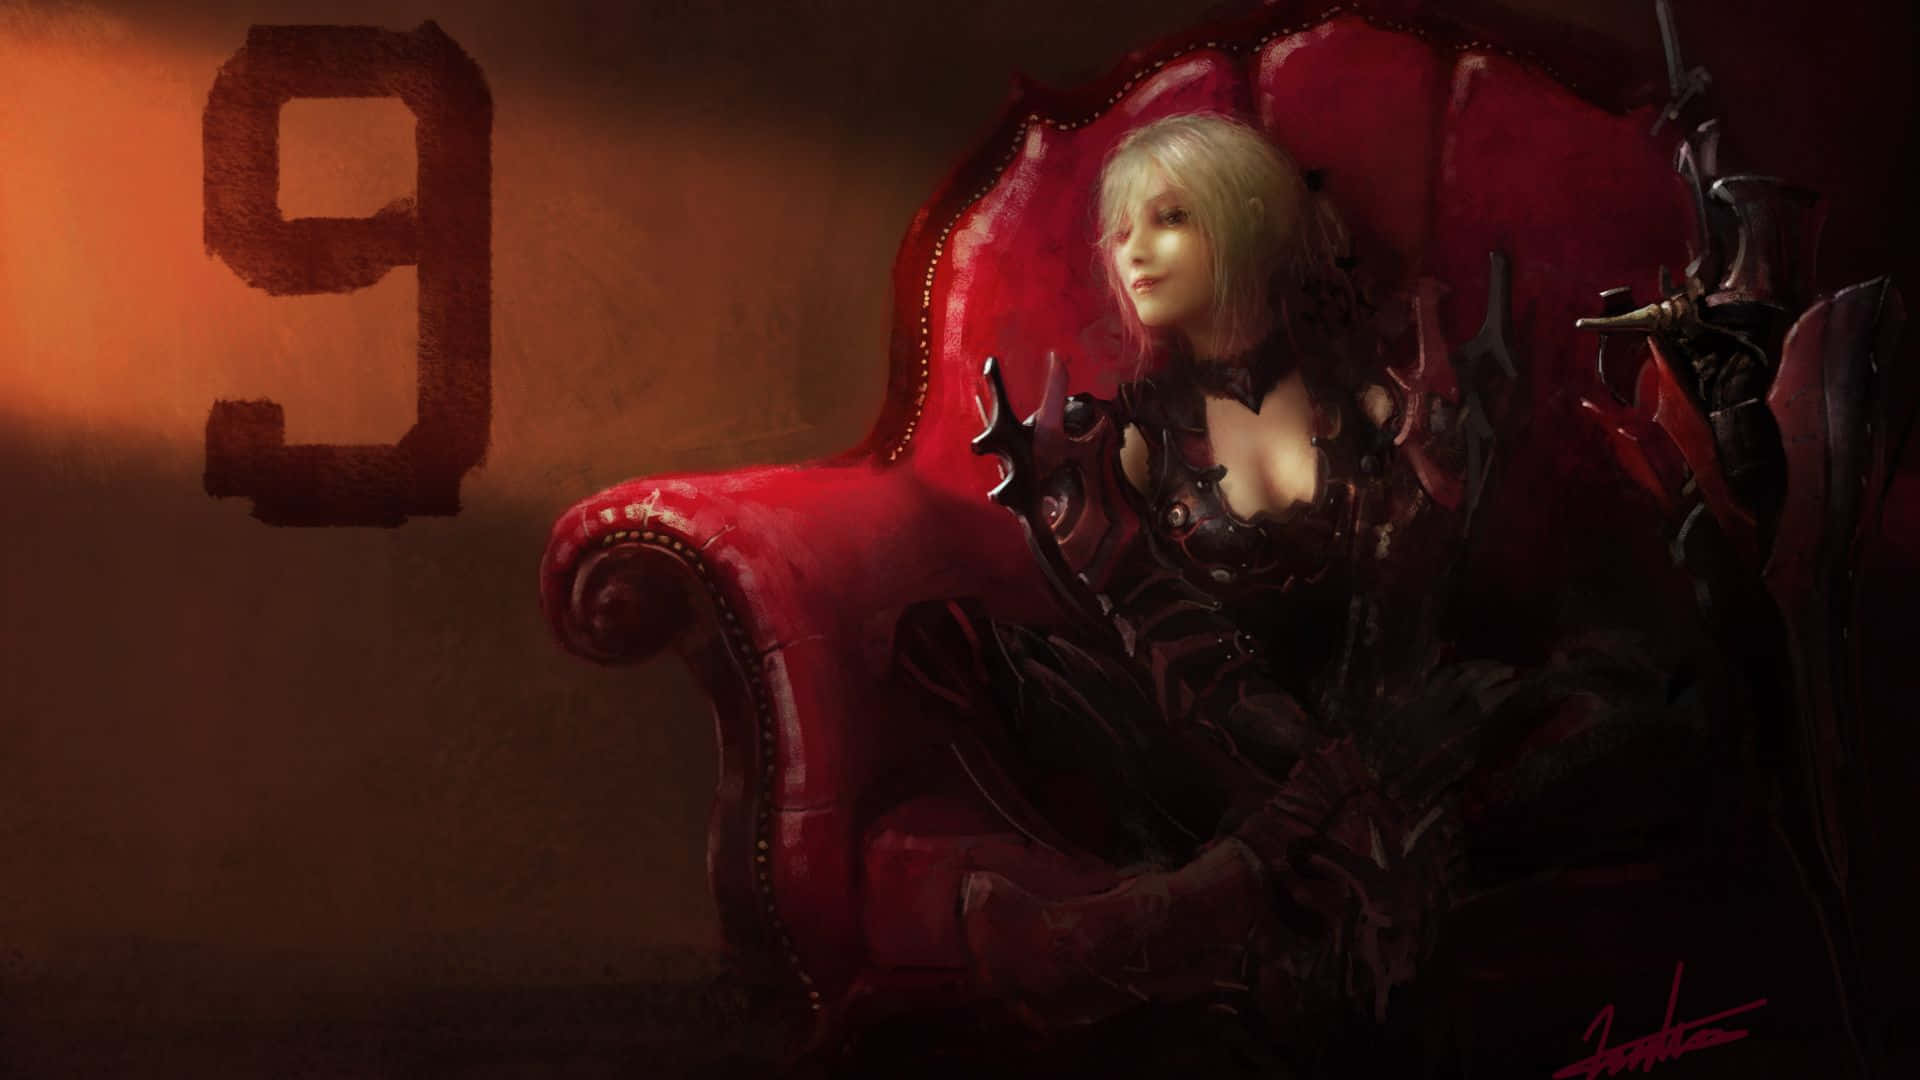 A Woman Sitting On A Red Chair With A Sword